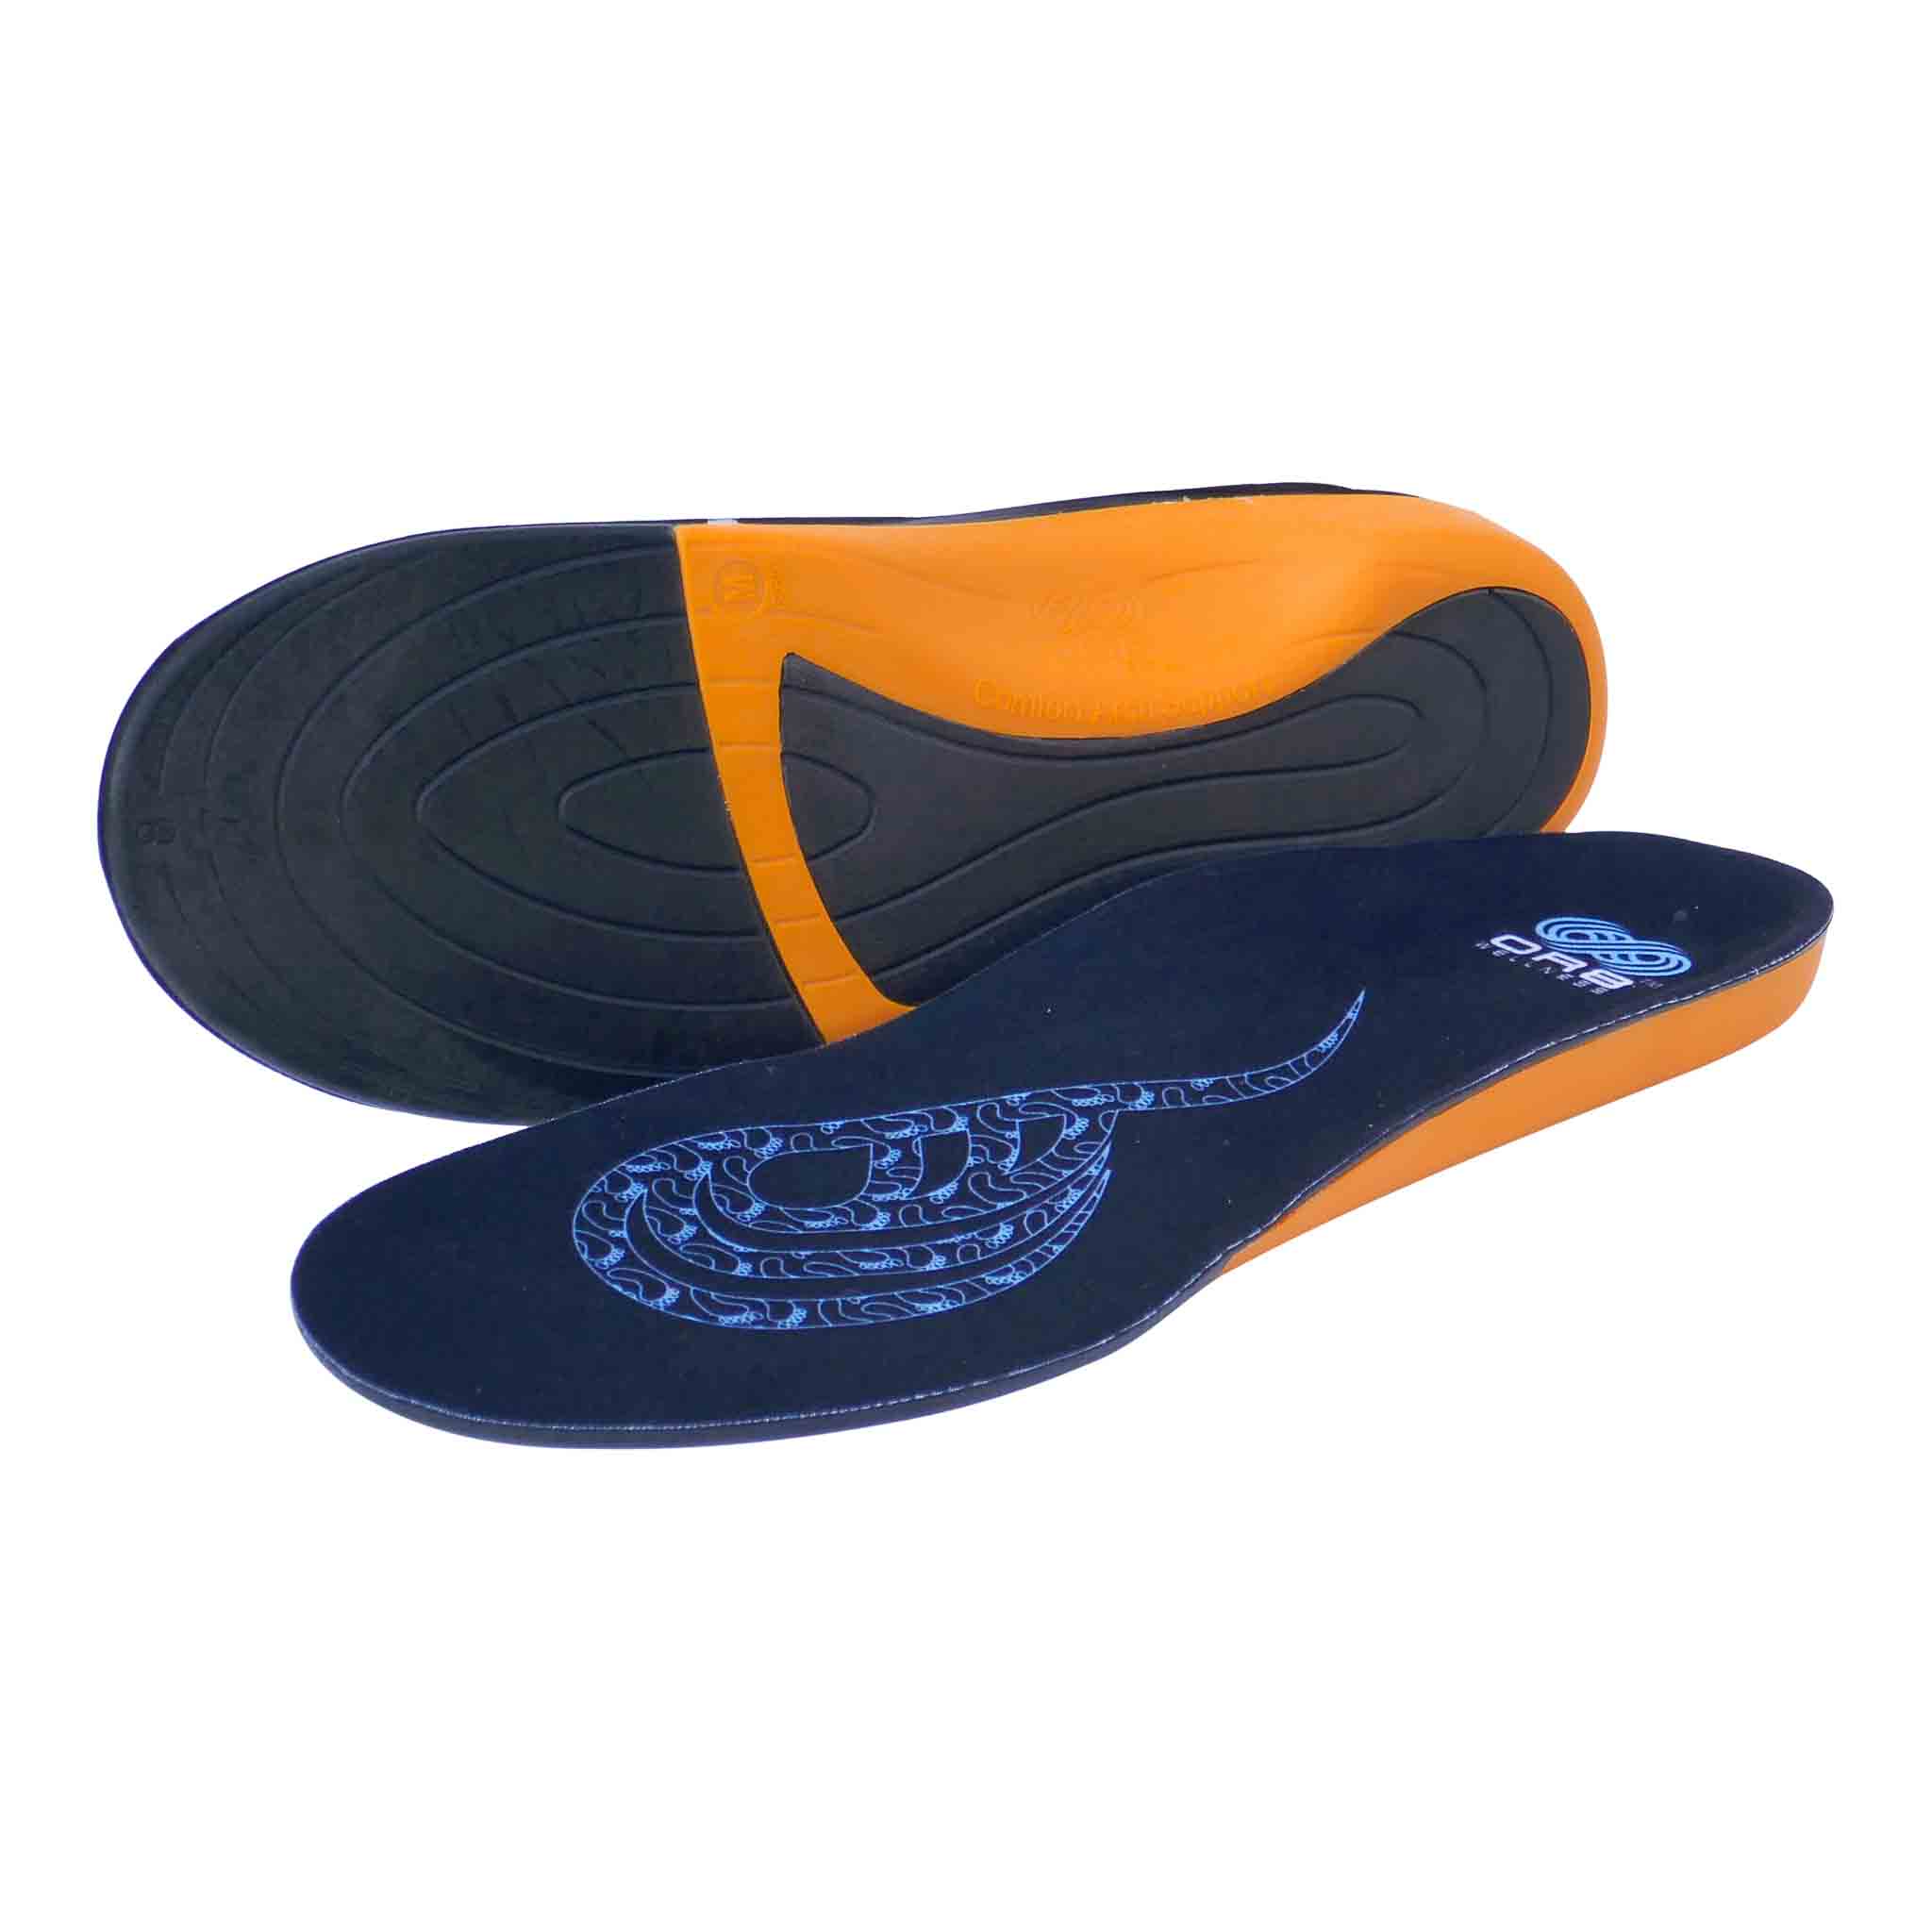 ENDURANCE INSOLE FOR WORK BOOTS